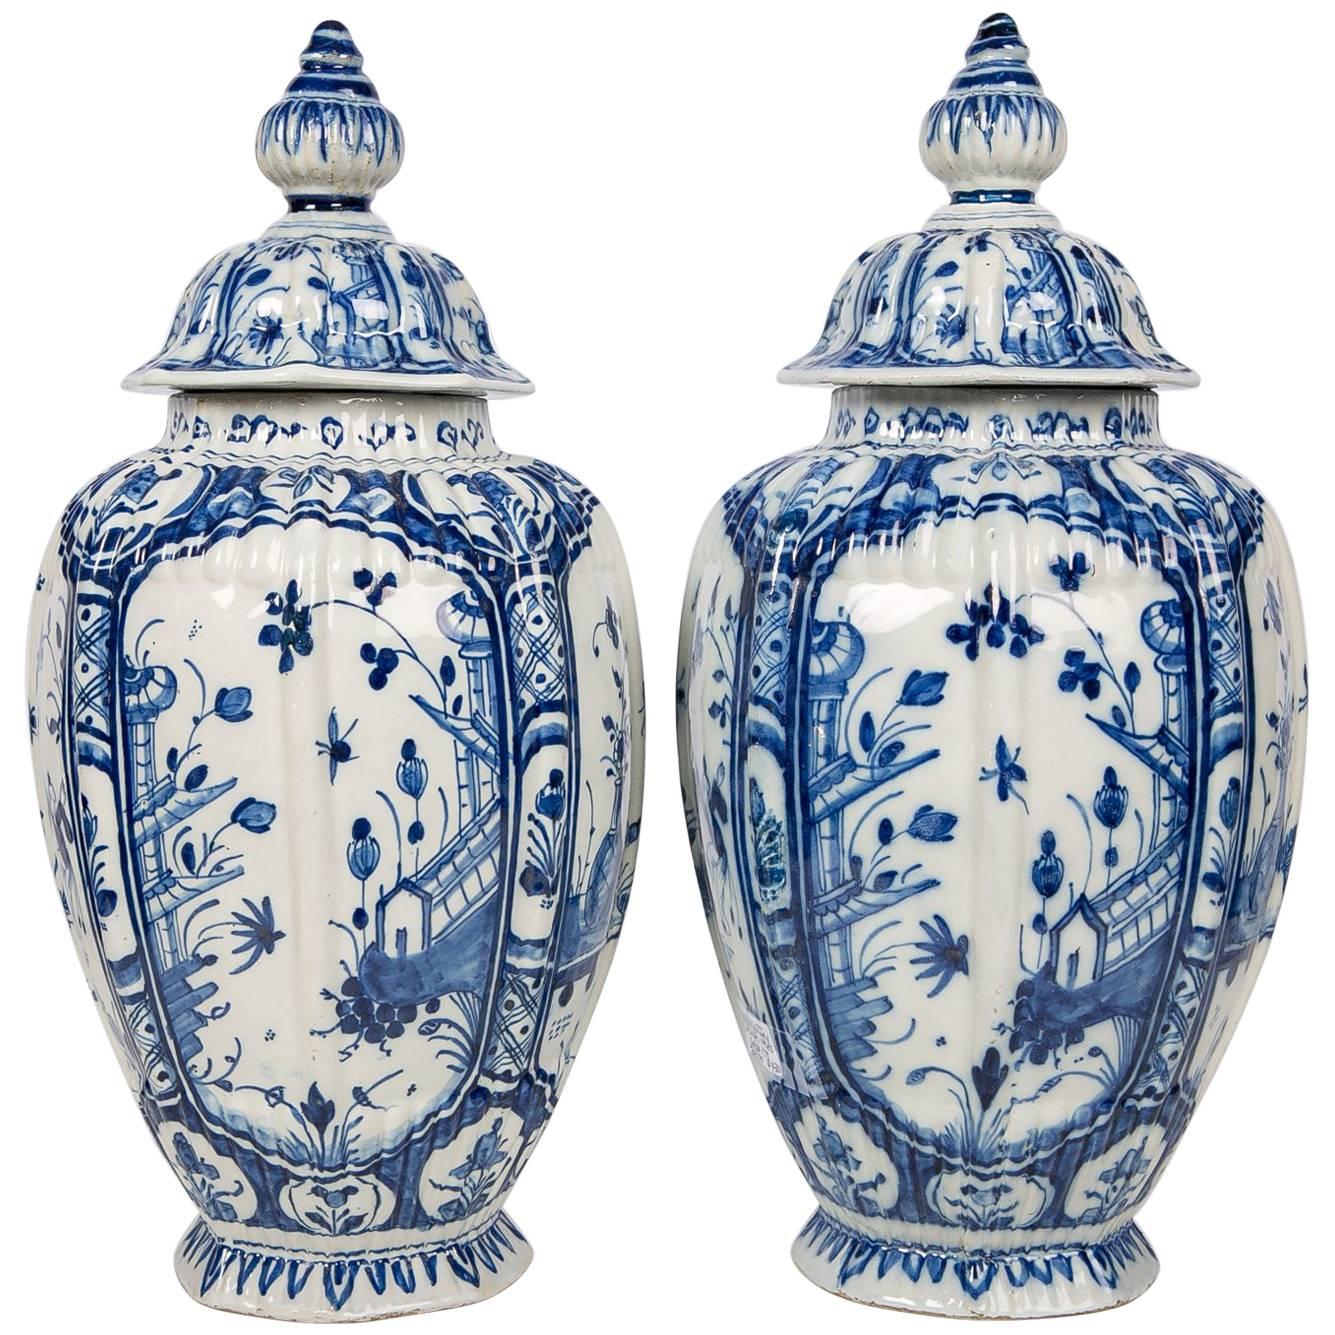 Pair of Delft Jars Blue and White, 18th Century